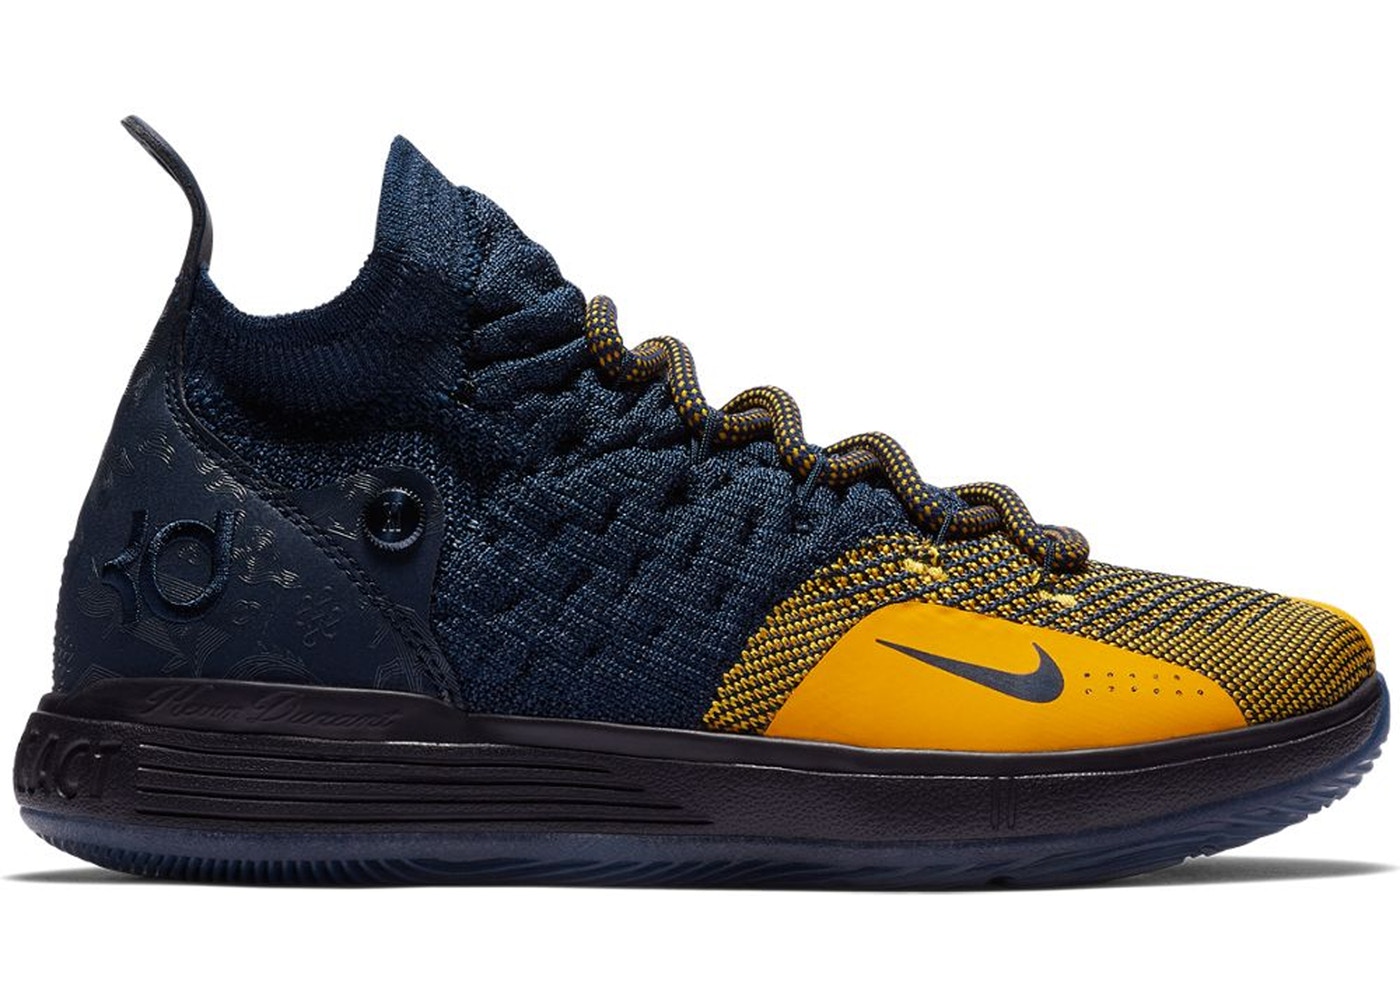 kd 11 black and yellow